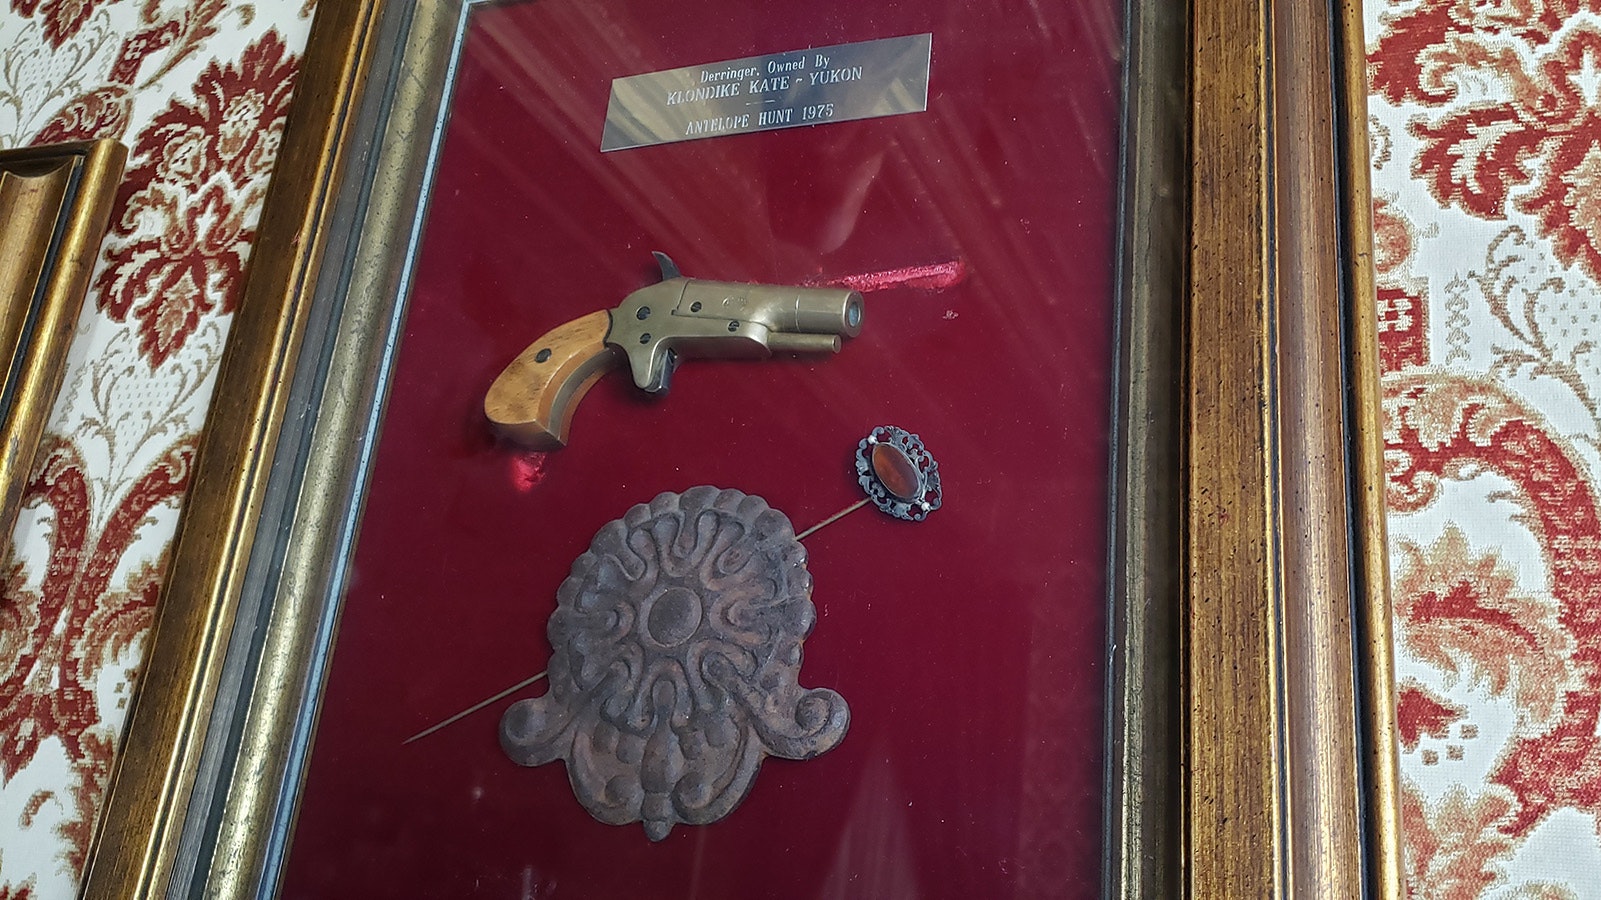 Klondike Kate's gun is under glass in the Owen Wister Dining Room at The Virginian.